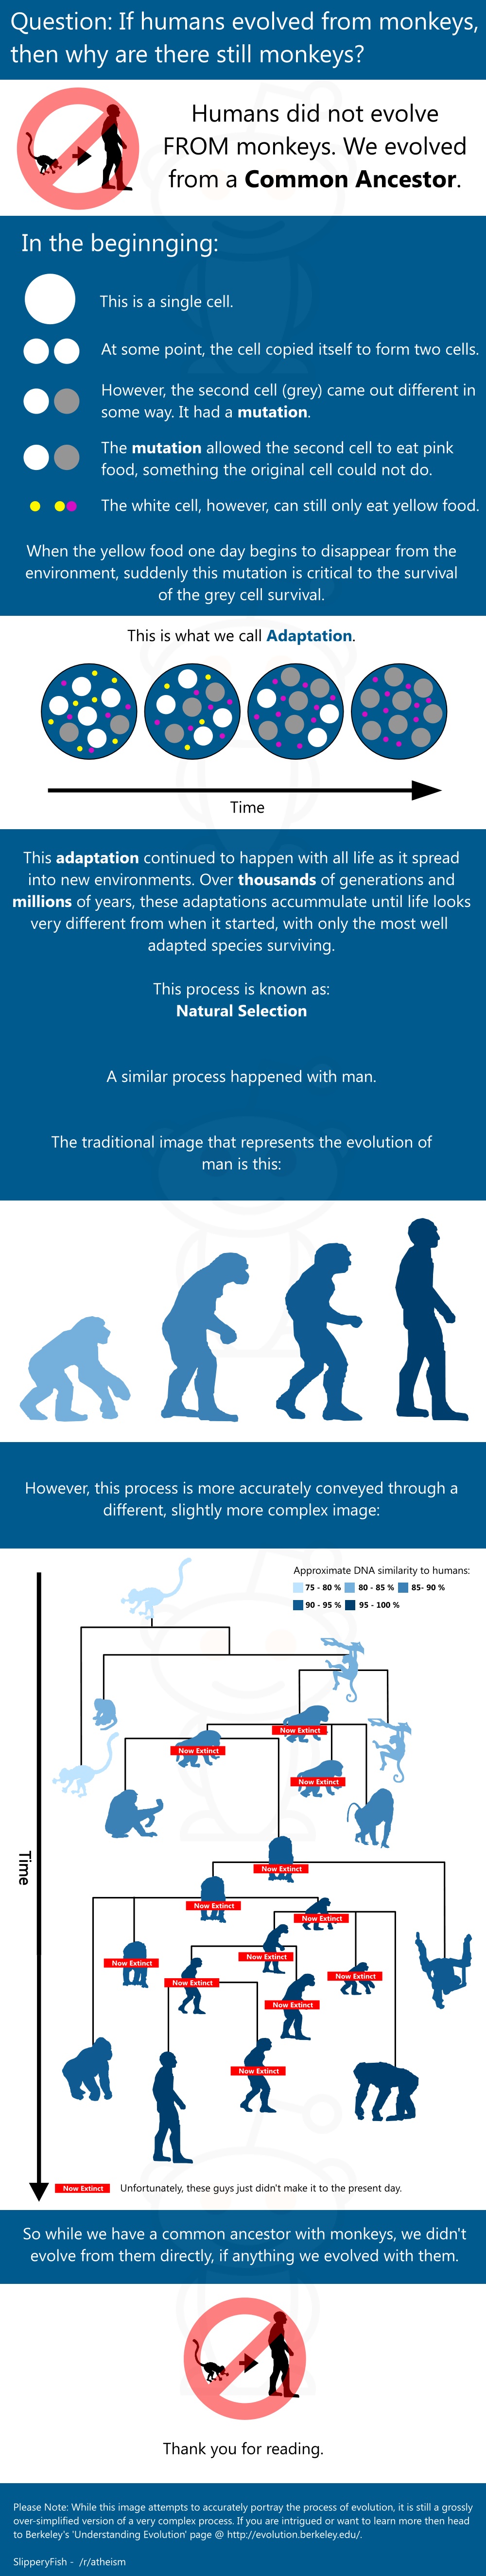 For the people who don't understand how evolution works.